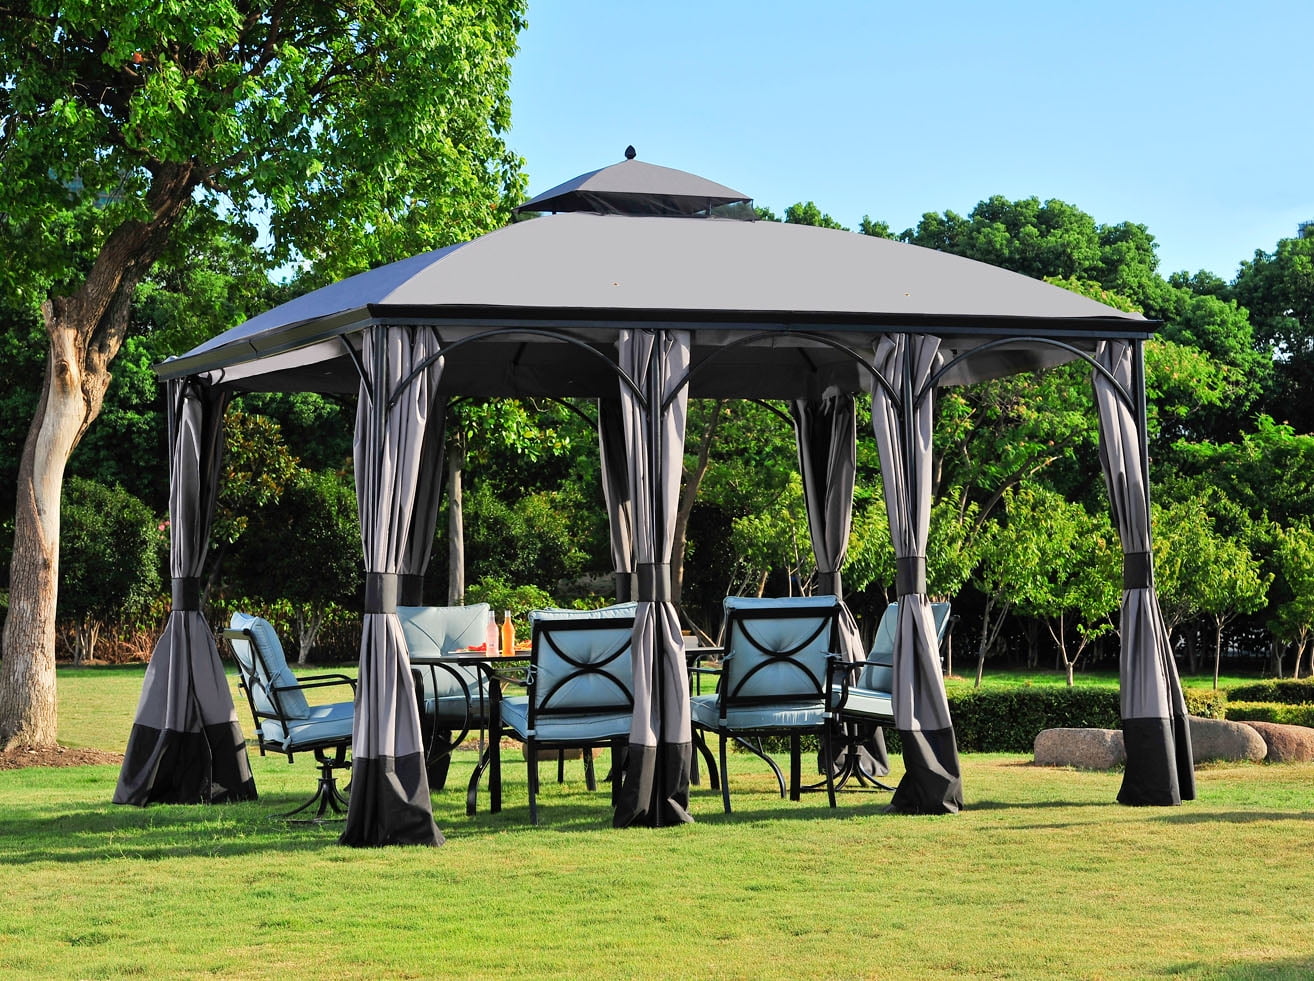 Although there are slight variations in the sizes of gazebos sold by most o...